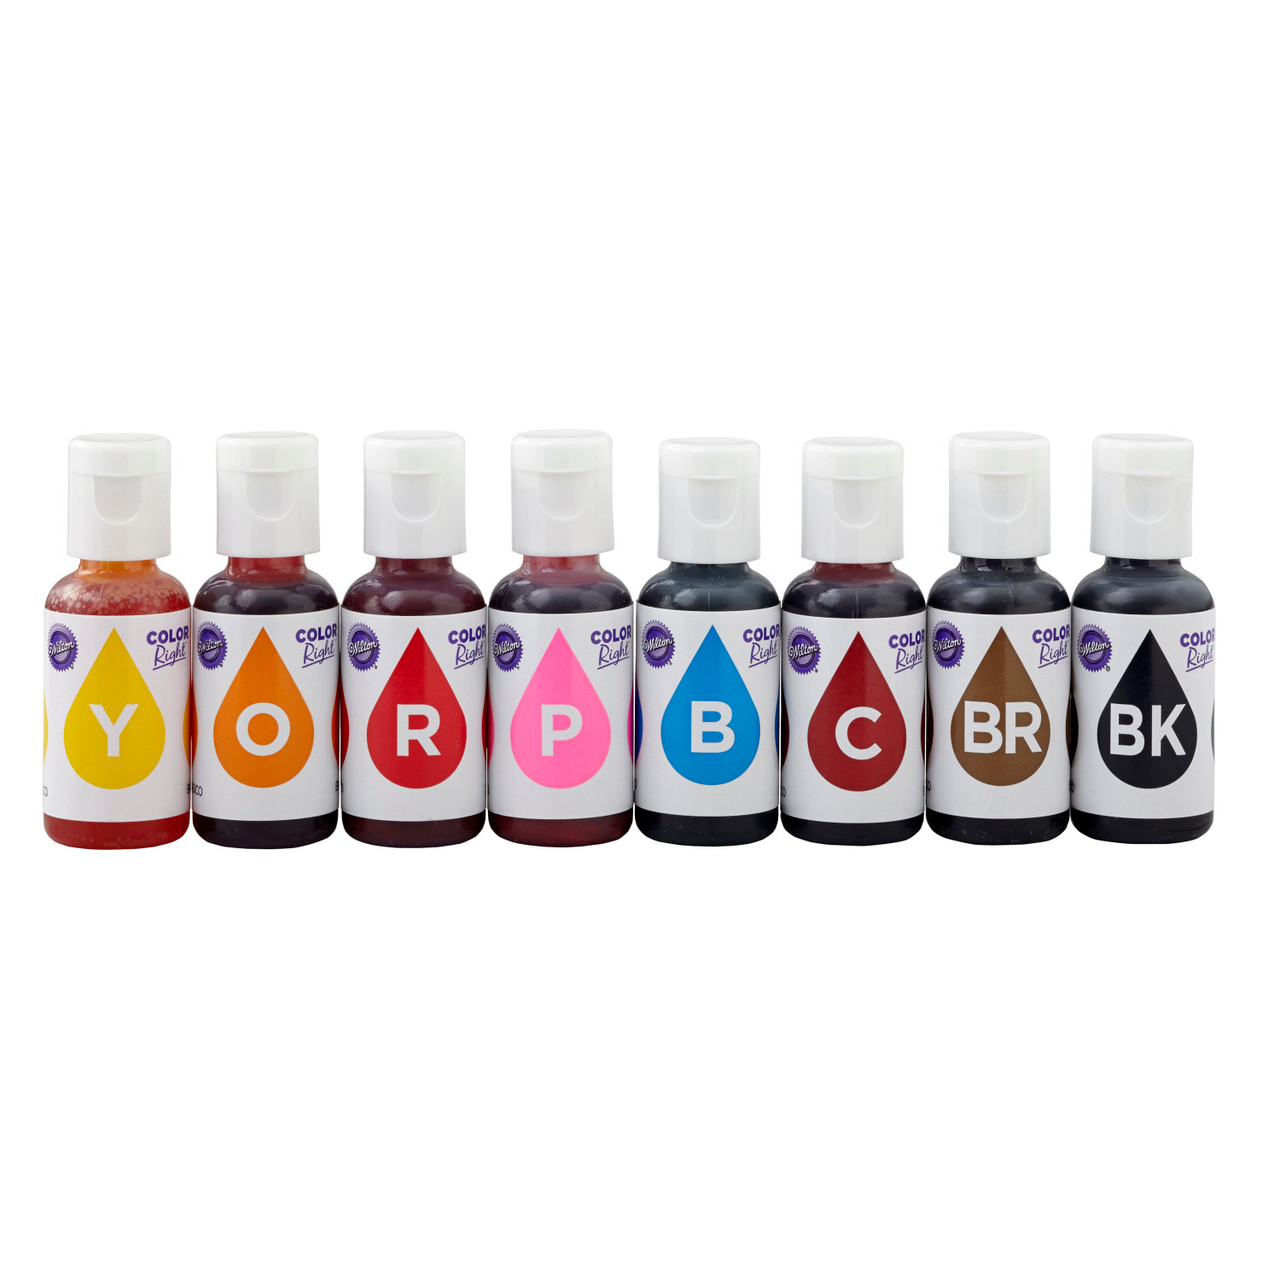 Color Right Performance Food Coloring Set - Wilton